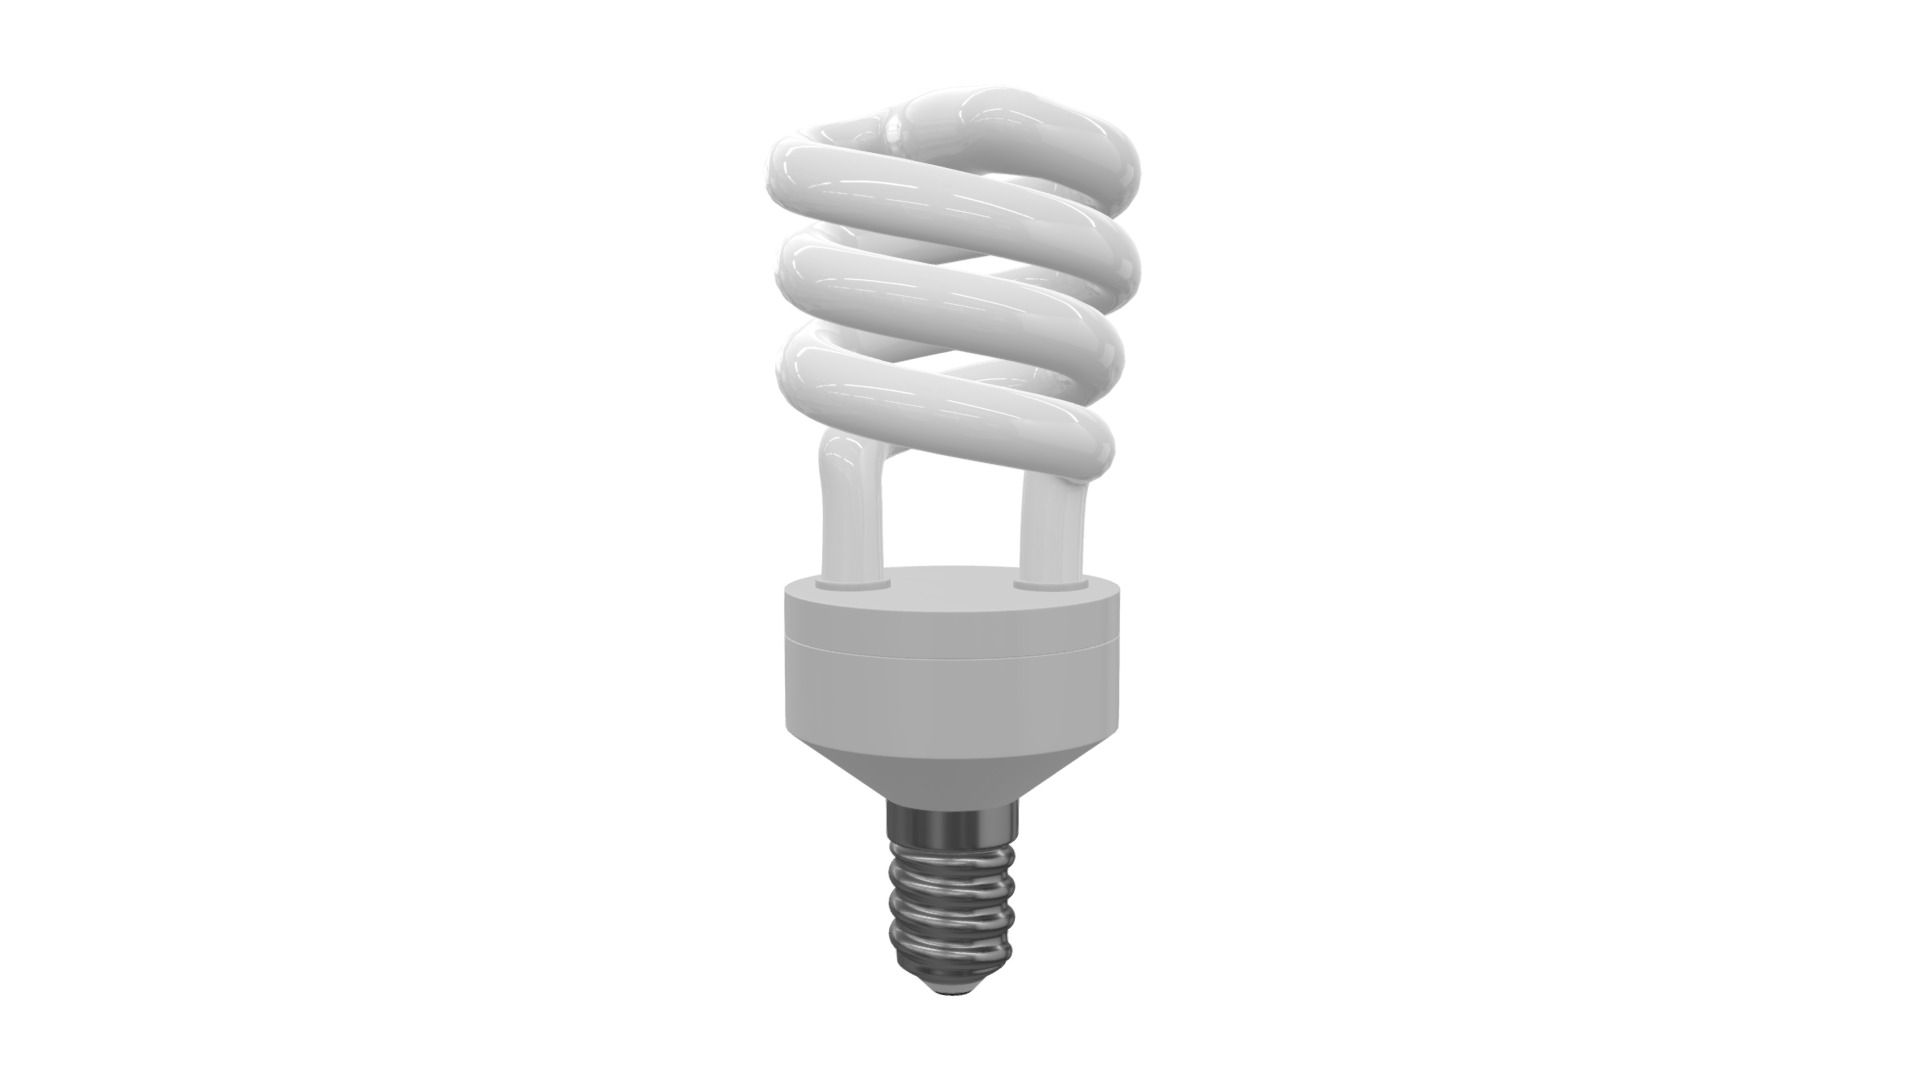 3D model Compact fluorescent light bulb 2 - This is a 3D model of the Compact fluorescent light bulb 2. The 3D model is about a close-up of a light bulb.